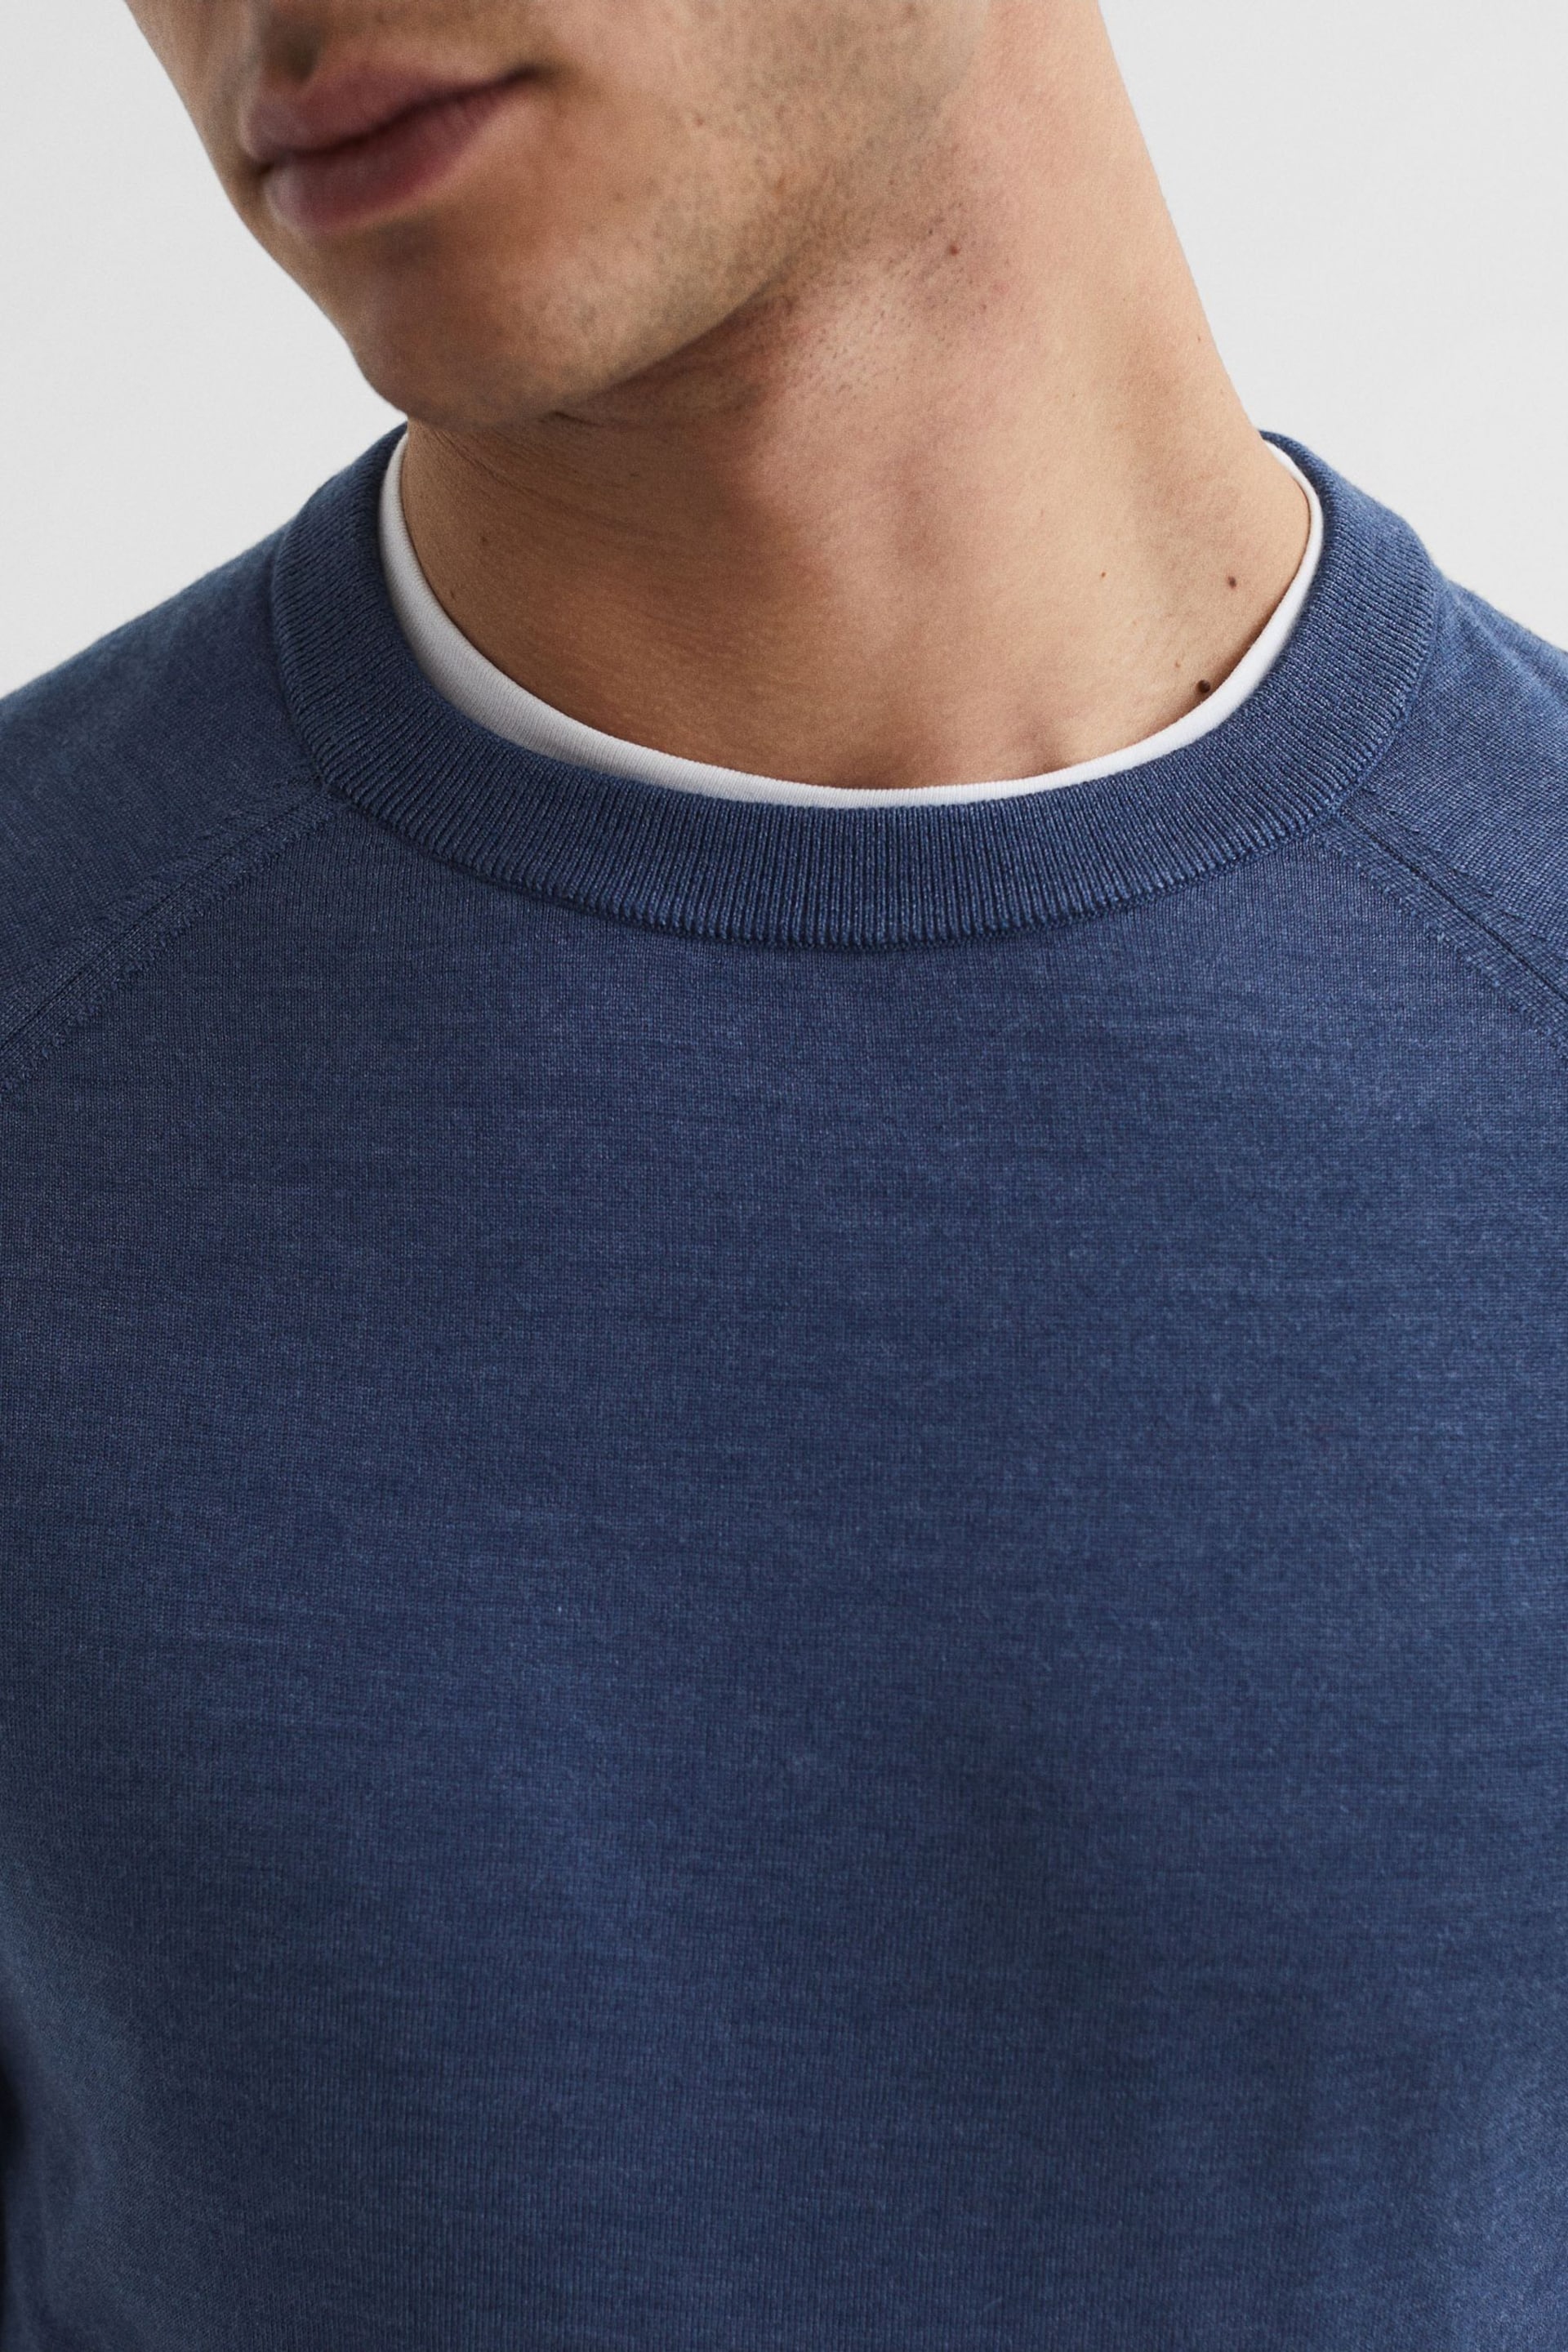 Reiss Airforce Blue Tinto Merino Silk Knitted Jumper - Image 4 of 6